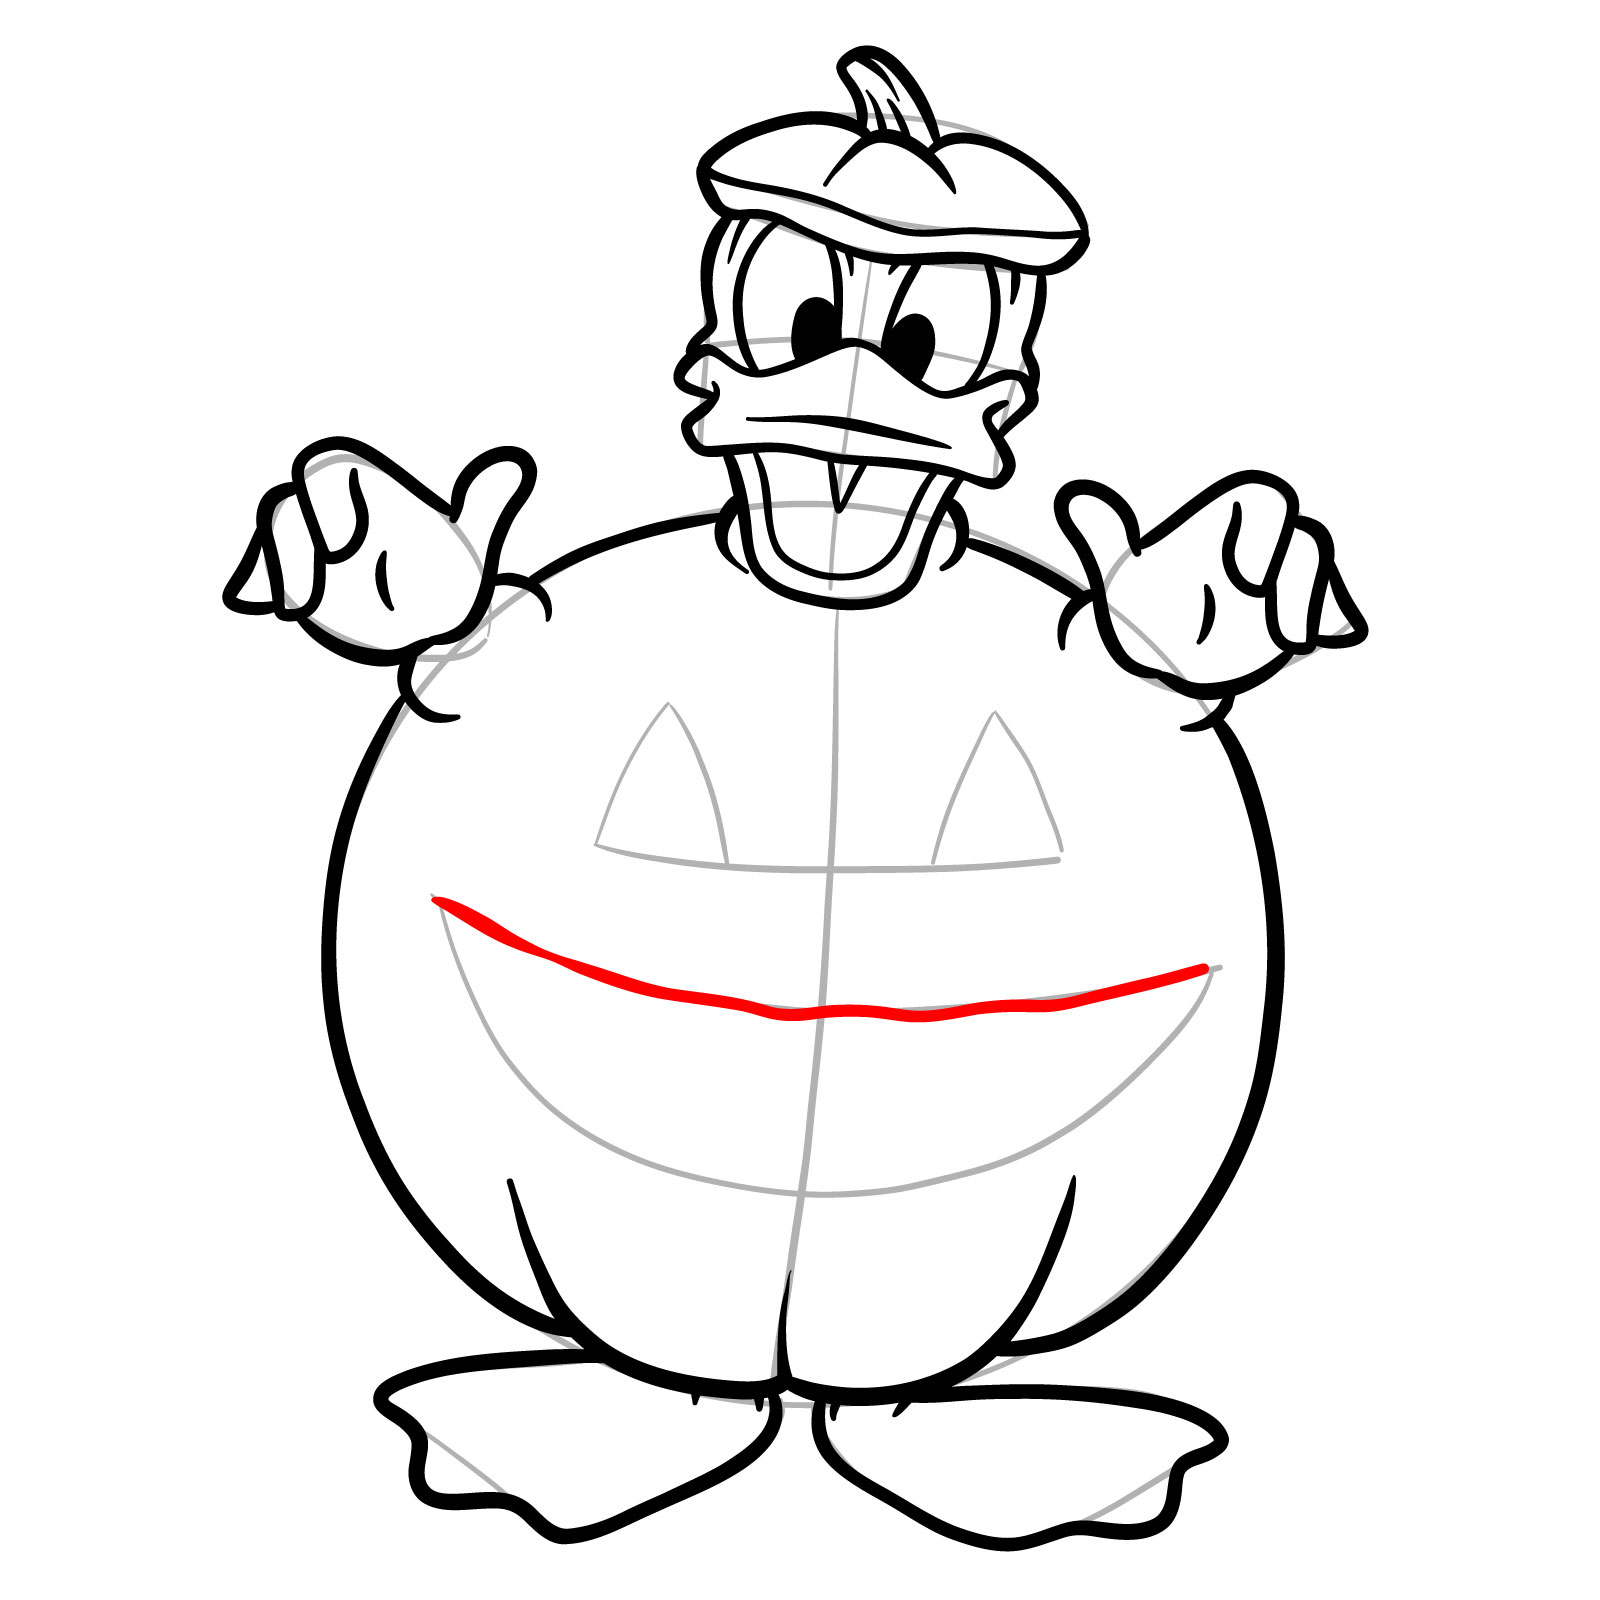 How to draw Halloween Donald Duck in a jack o'lantern - step 20